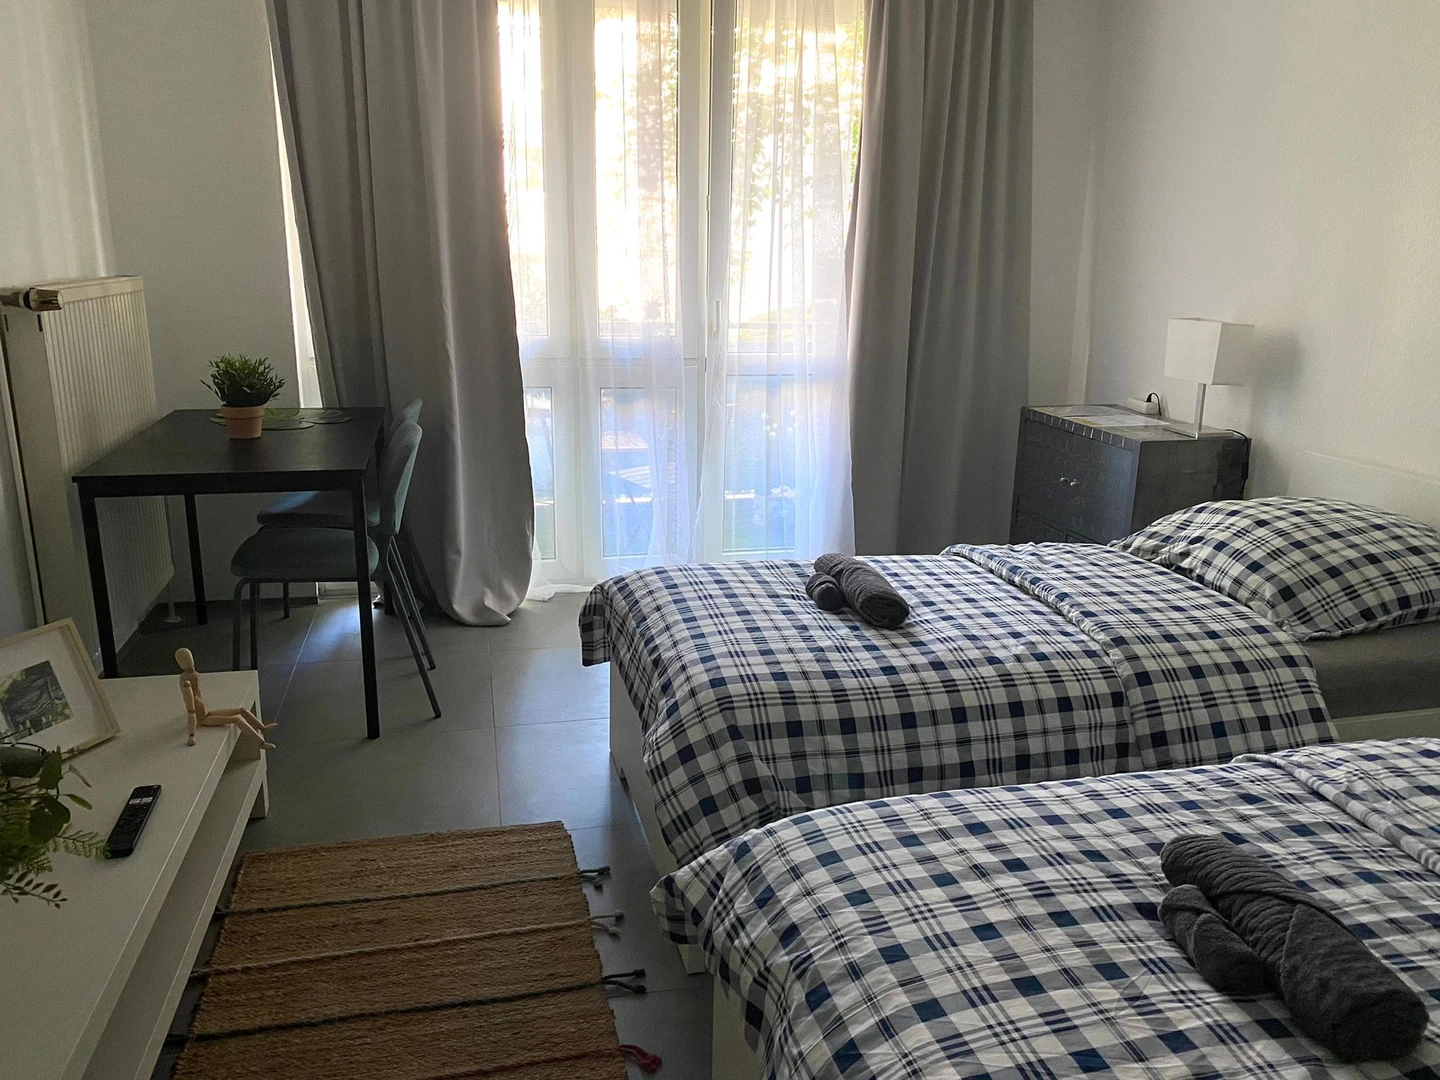 Room for rent with double bed Hanover